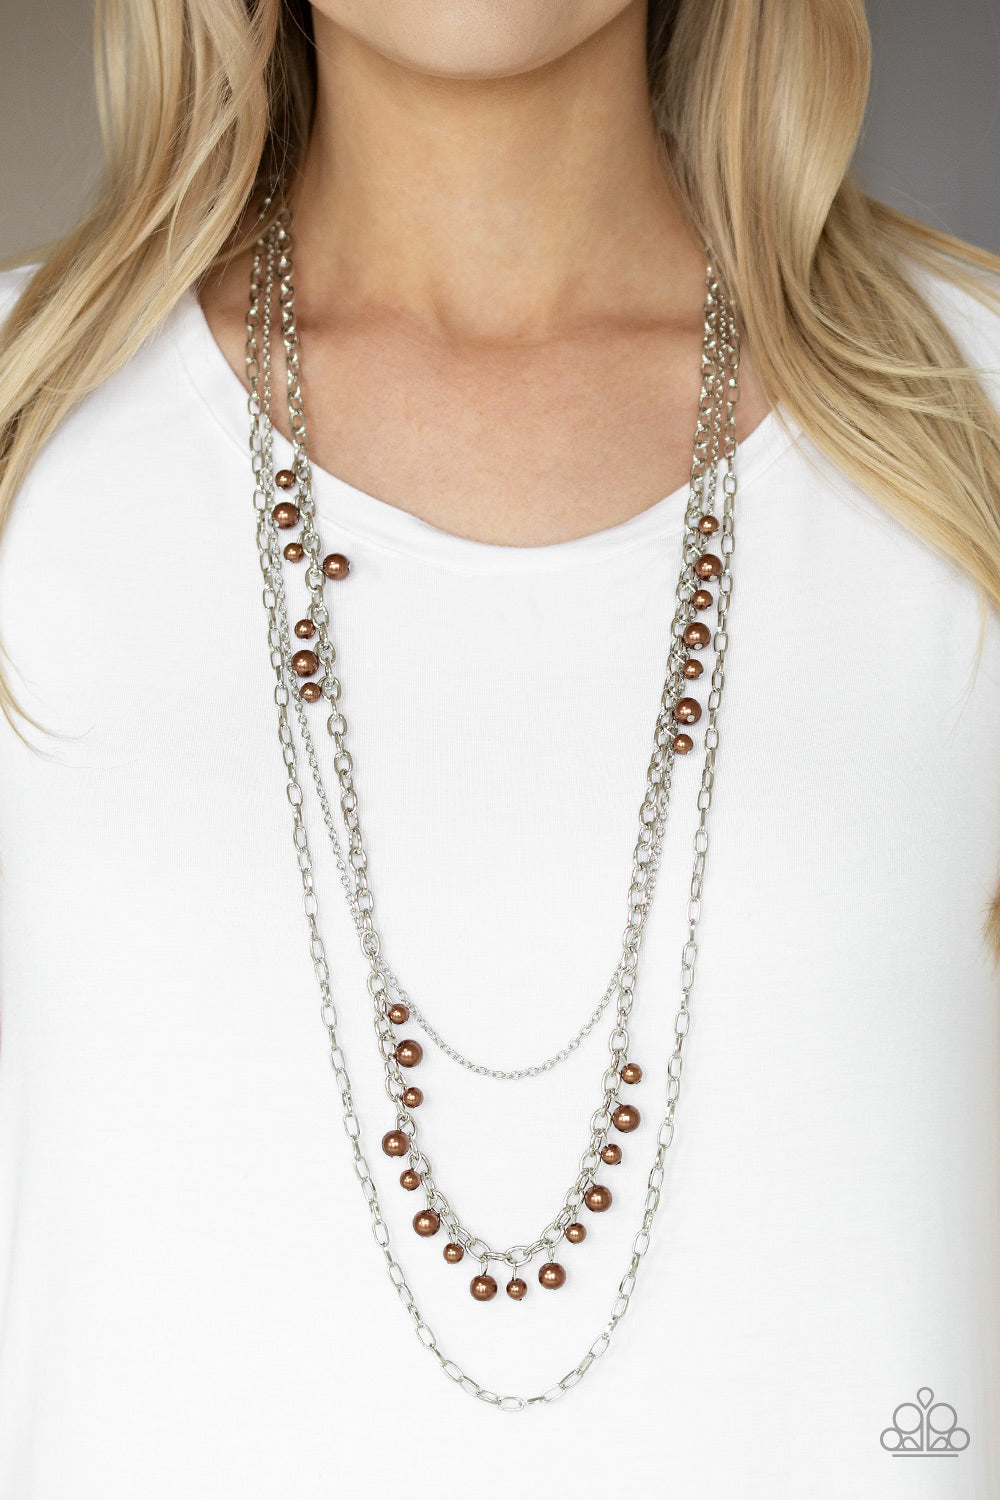 Pearl Pageant - Brown and Silver Necklace - Paparazzi Accessories - Three mismatched silver chains layer down the chest. Dainty brown pearls cascade down one silver chain. Trendy fashion jewelry for everyone.